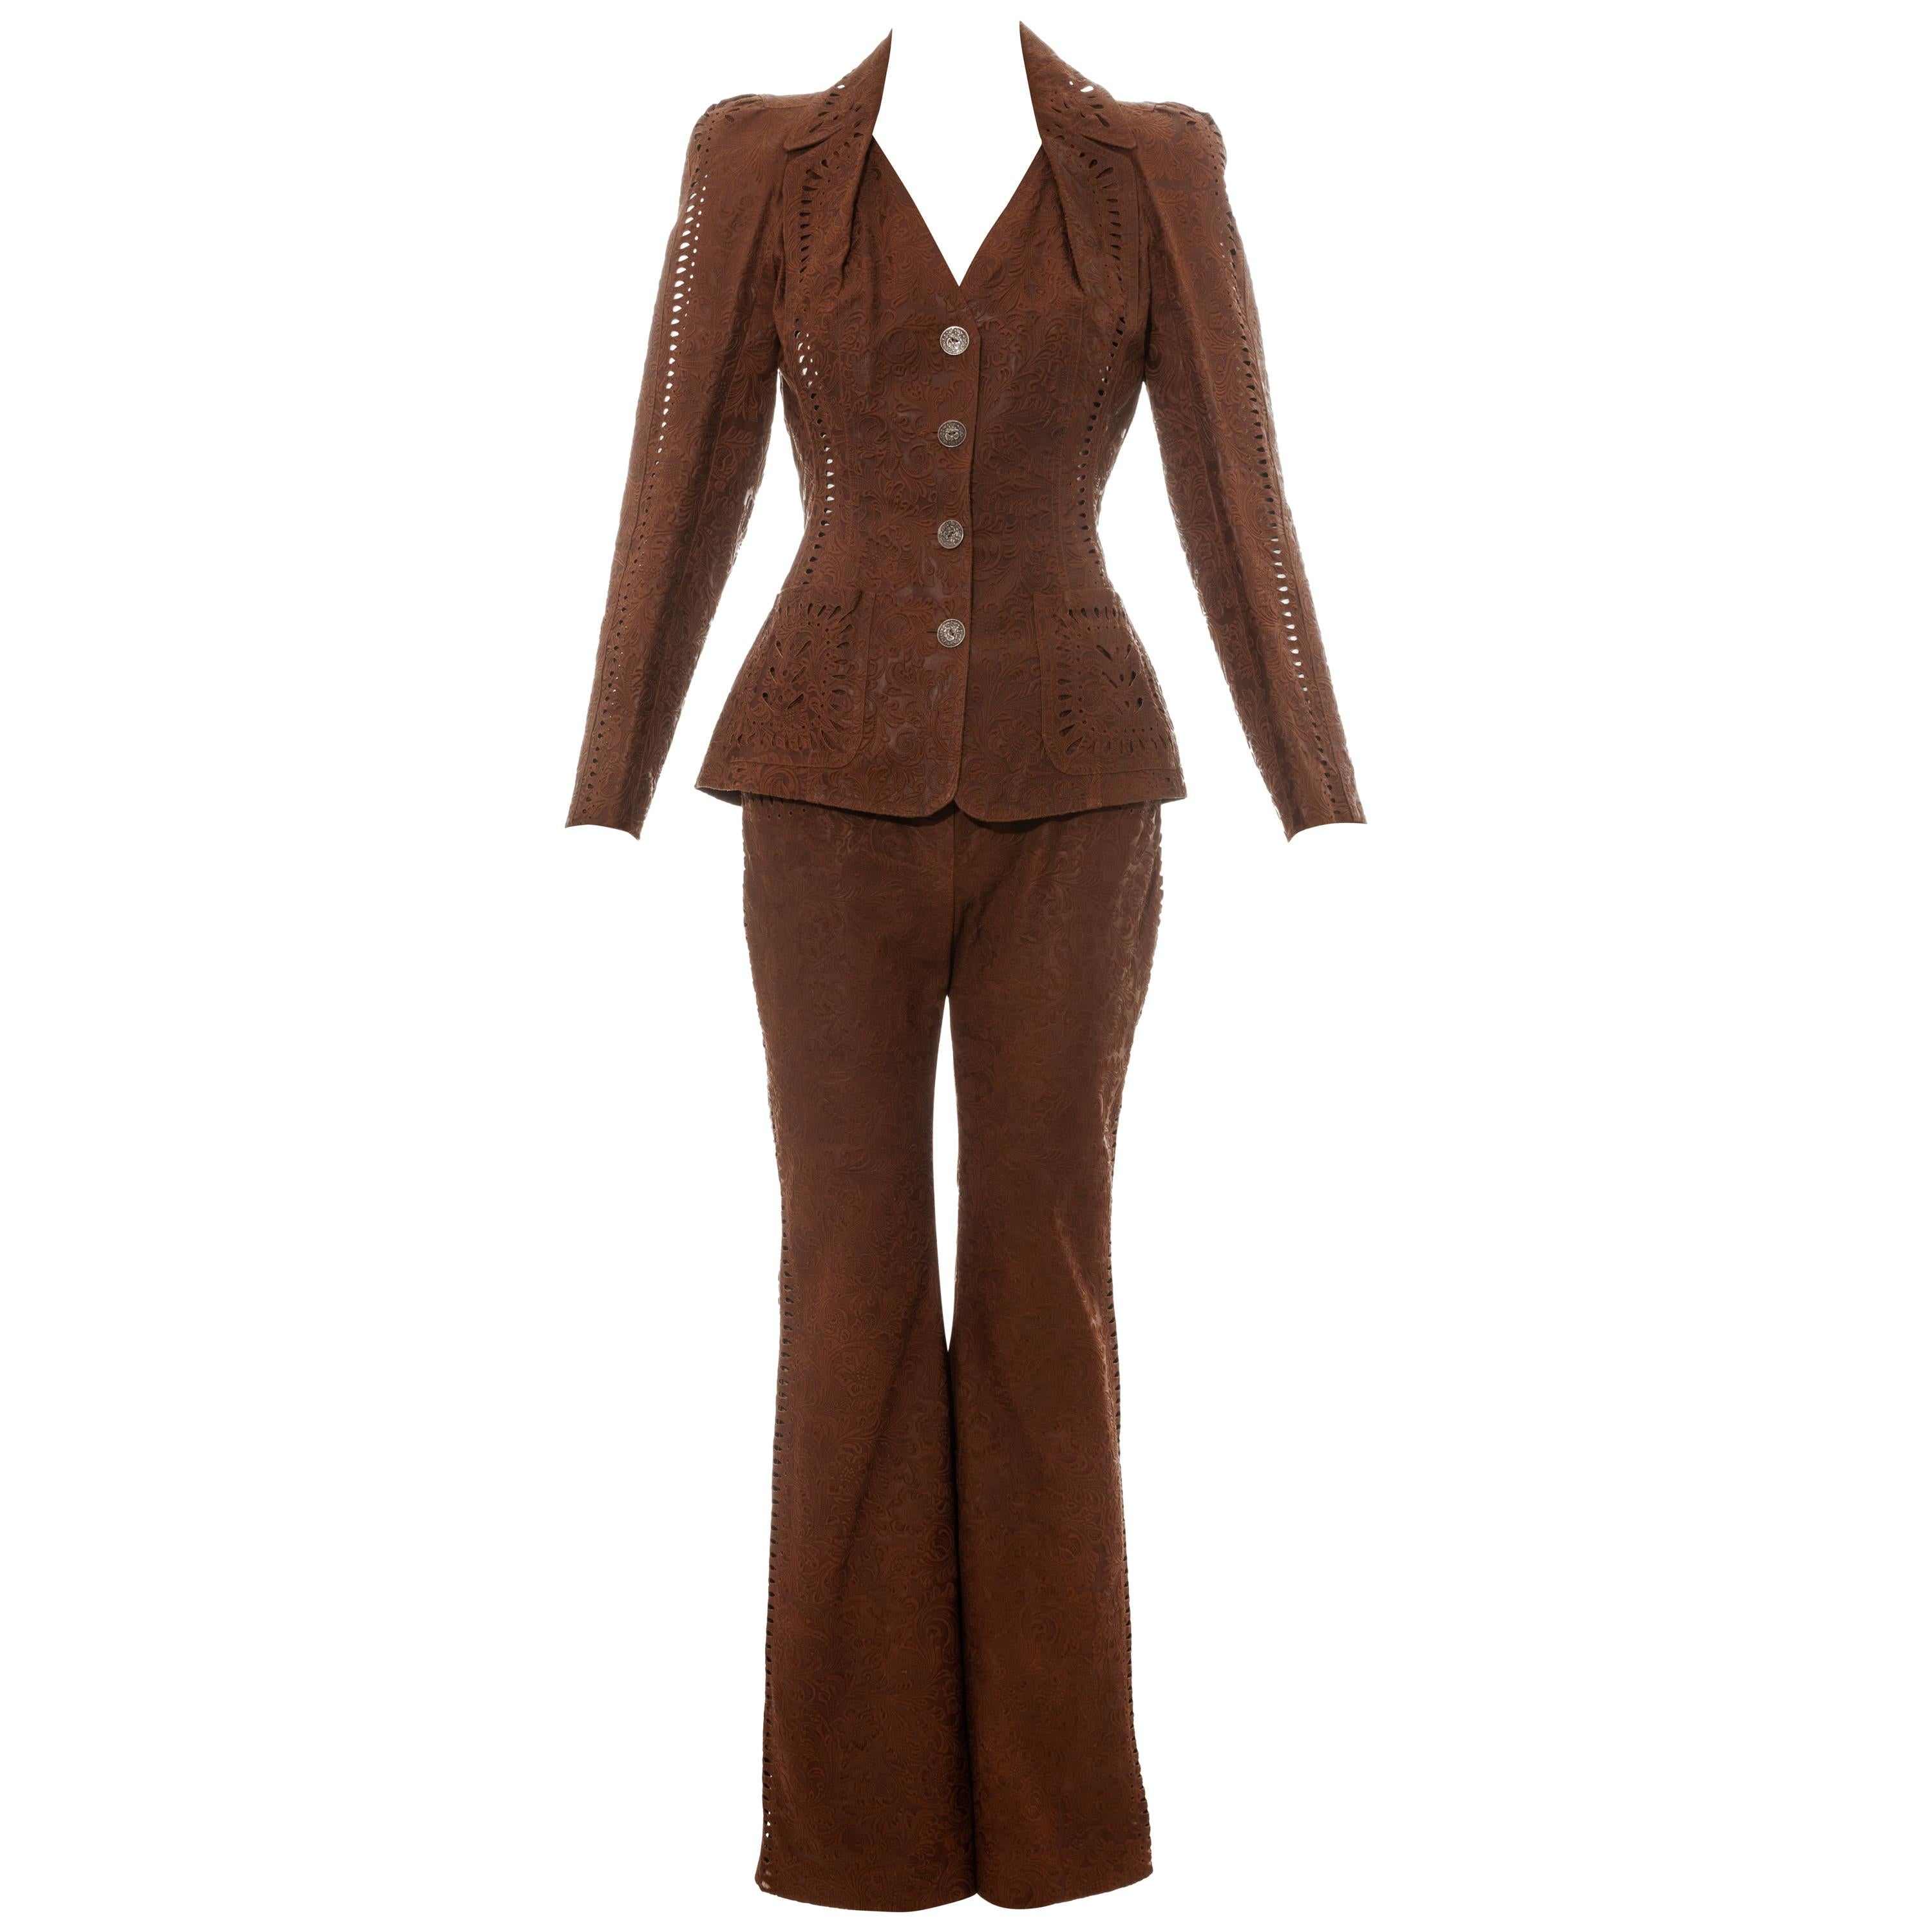 Christian Dior by John Galliano brown tooled leather pant suit, ss 2006 For Sale